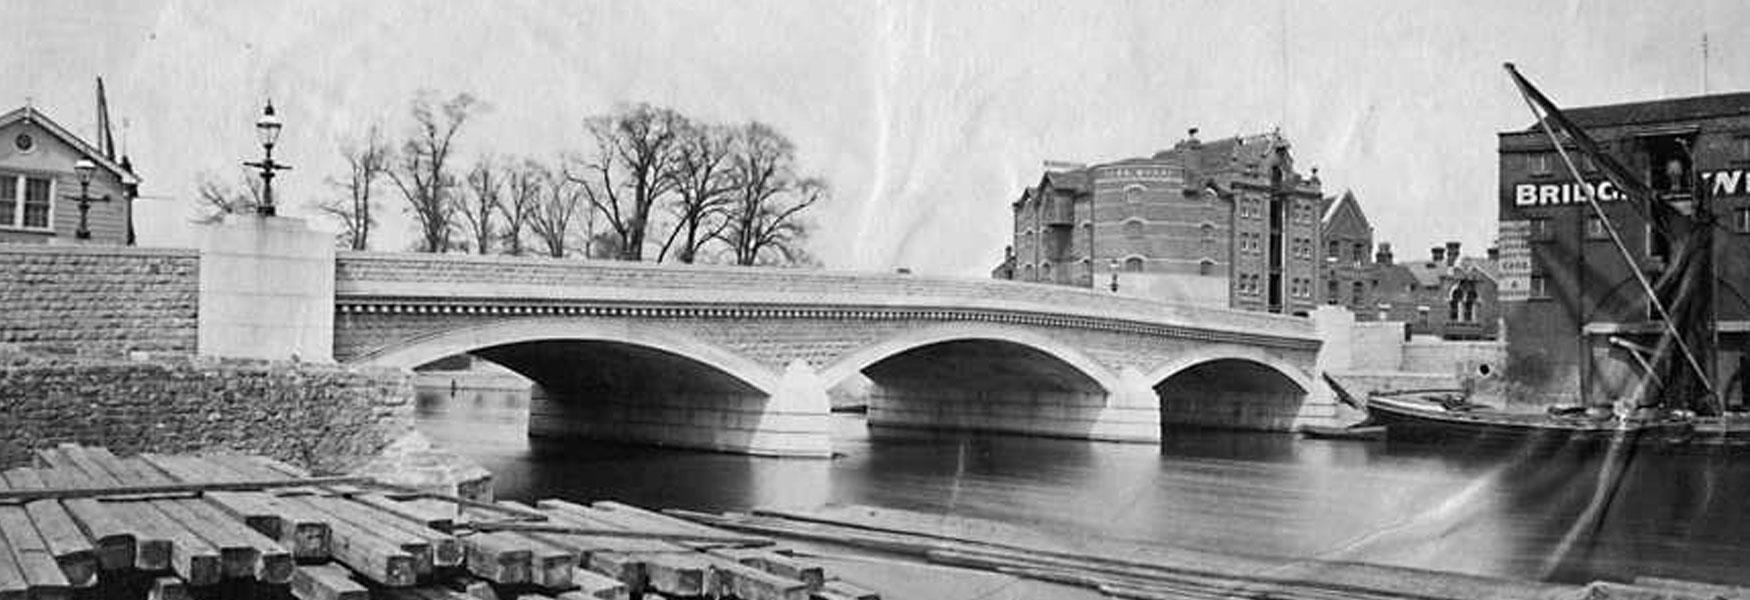 The 14th Century bridge crossing the Medway had to be replaced due to being unsafe in the 1870's and a new bridge was constructed with designs from Sir Joseph Bazelgetter between 1877-79.